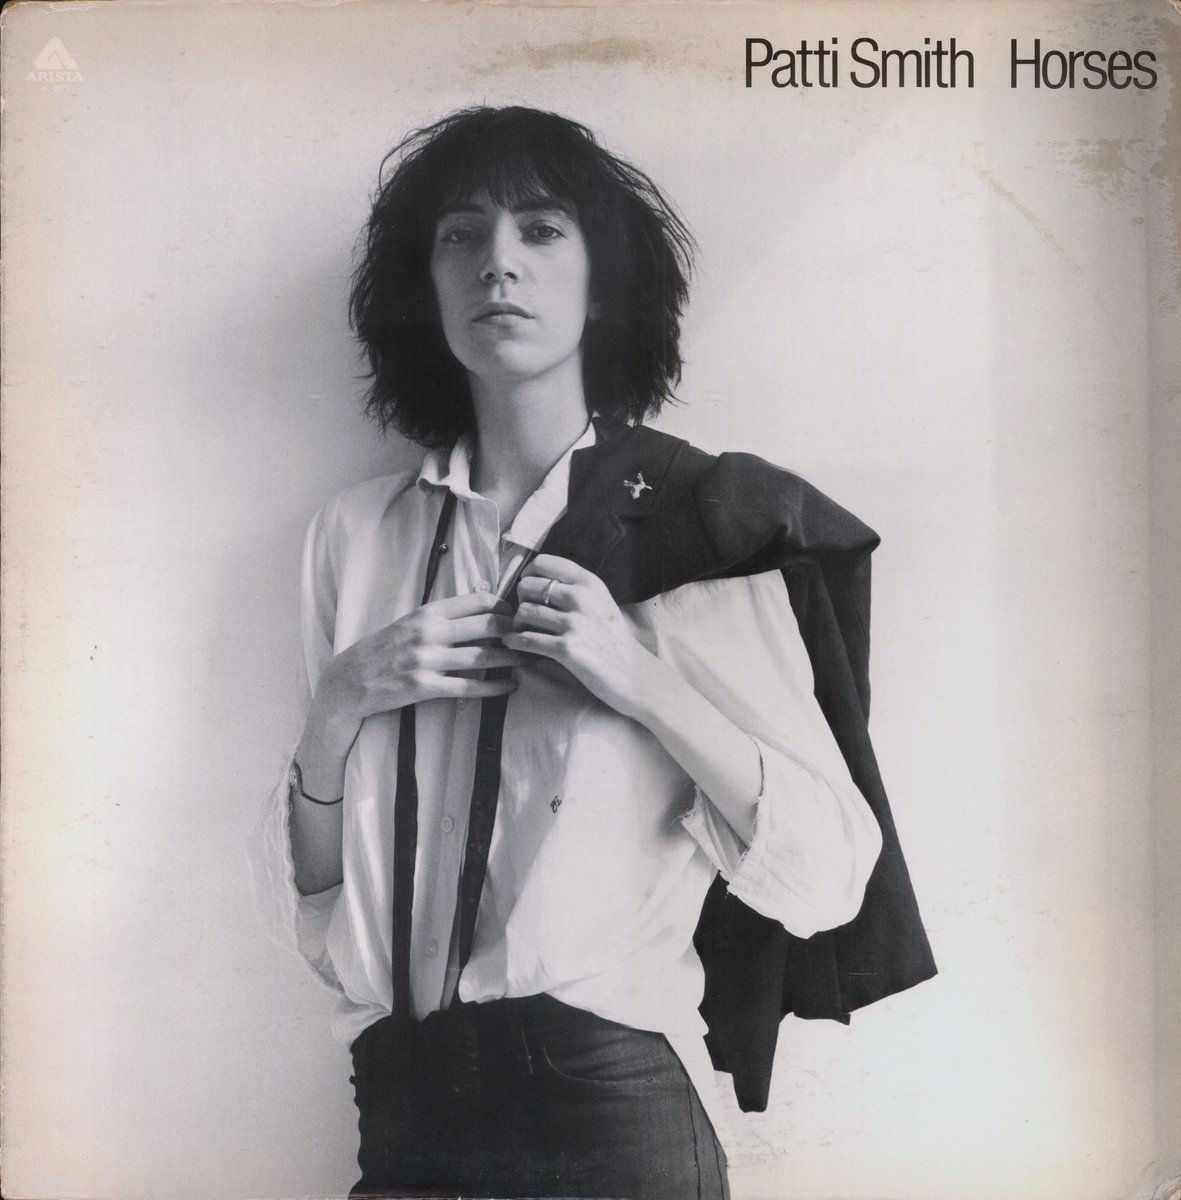 1975AOTY: Pink Floyd - Wish You Were Here#2: Bob Dylan - Blood on the Tracks#3: Renaissance - Scheherazade and Other Stories#4: Patti Smith - HorsesTotal: 17